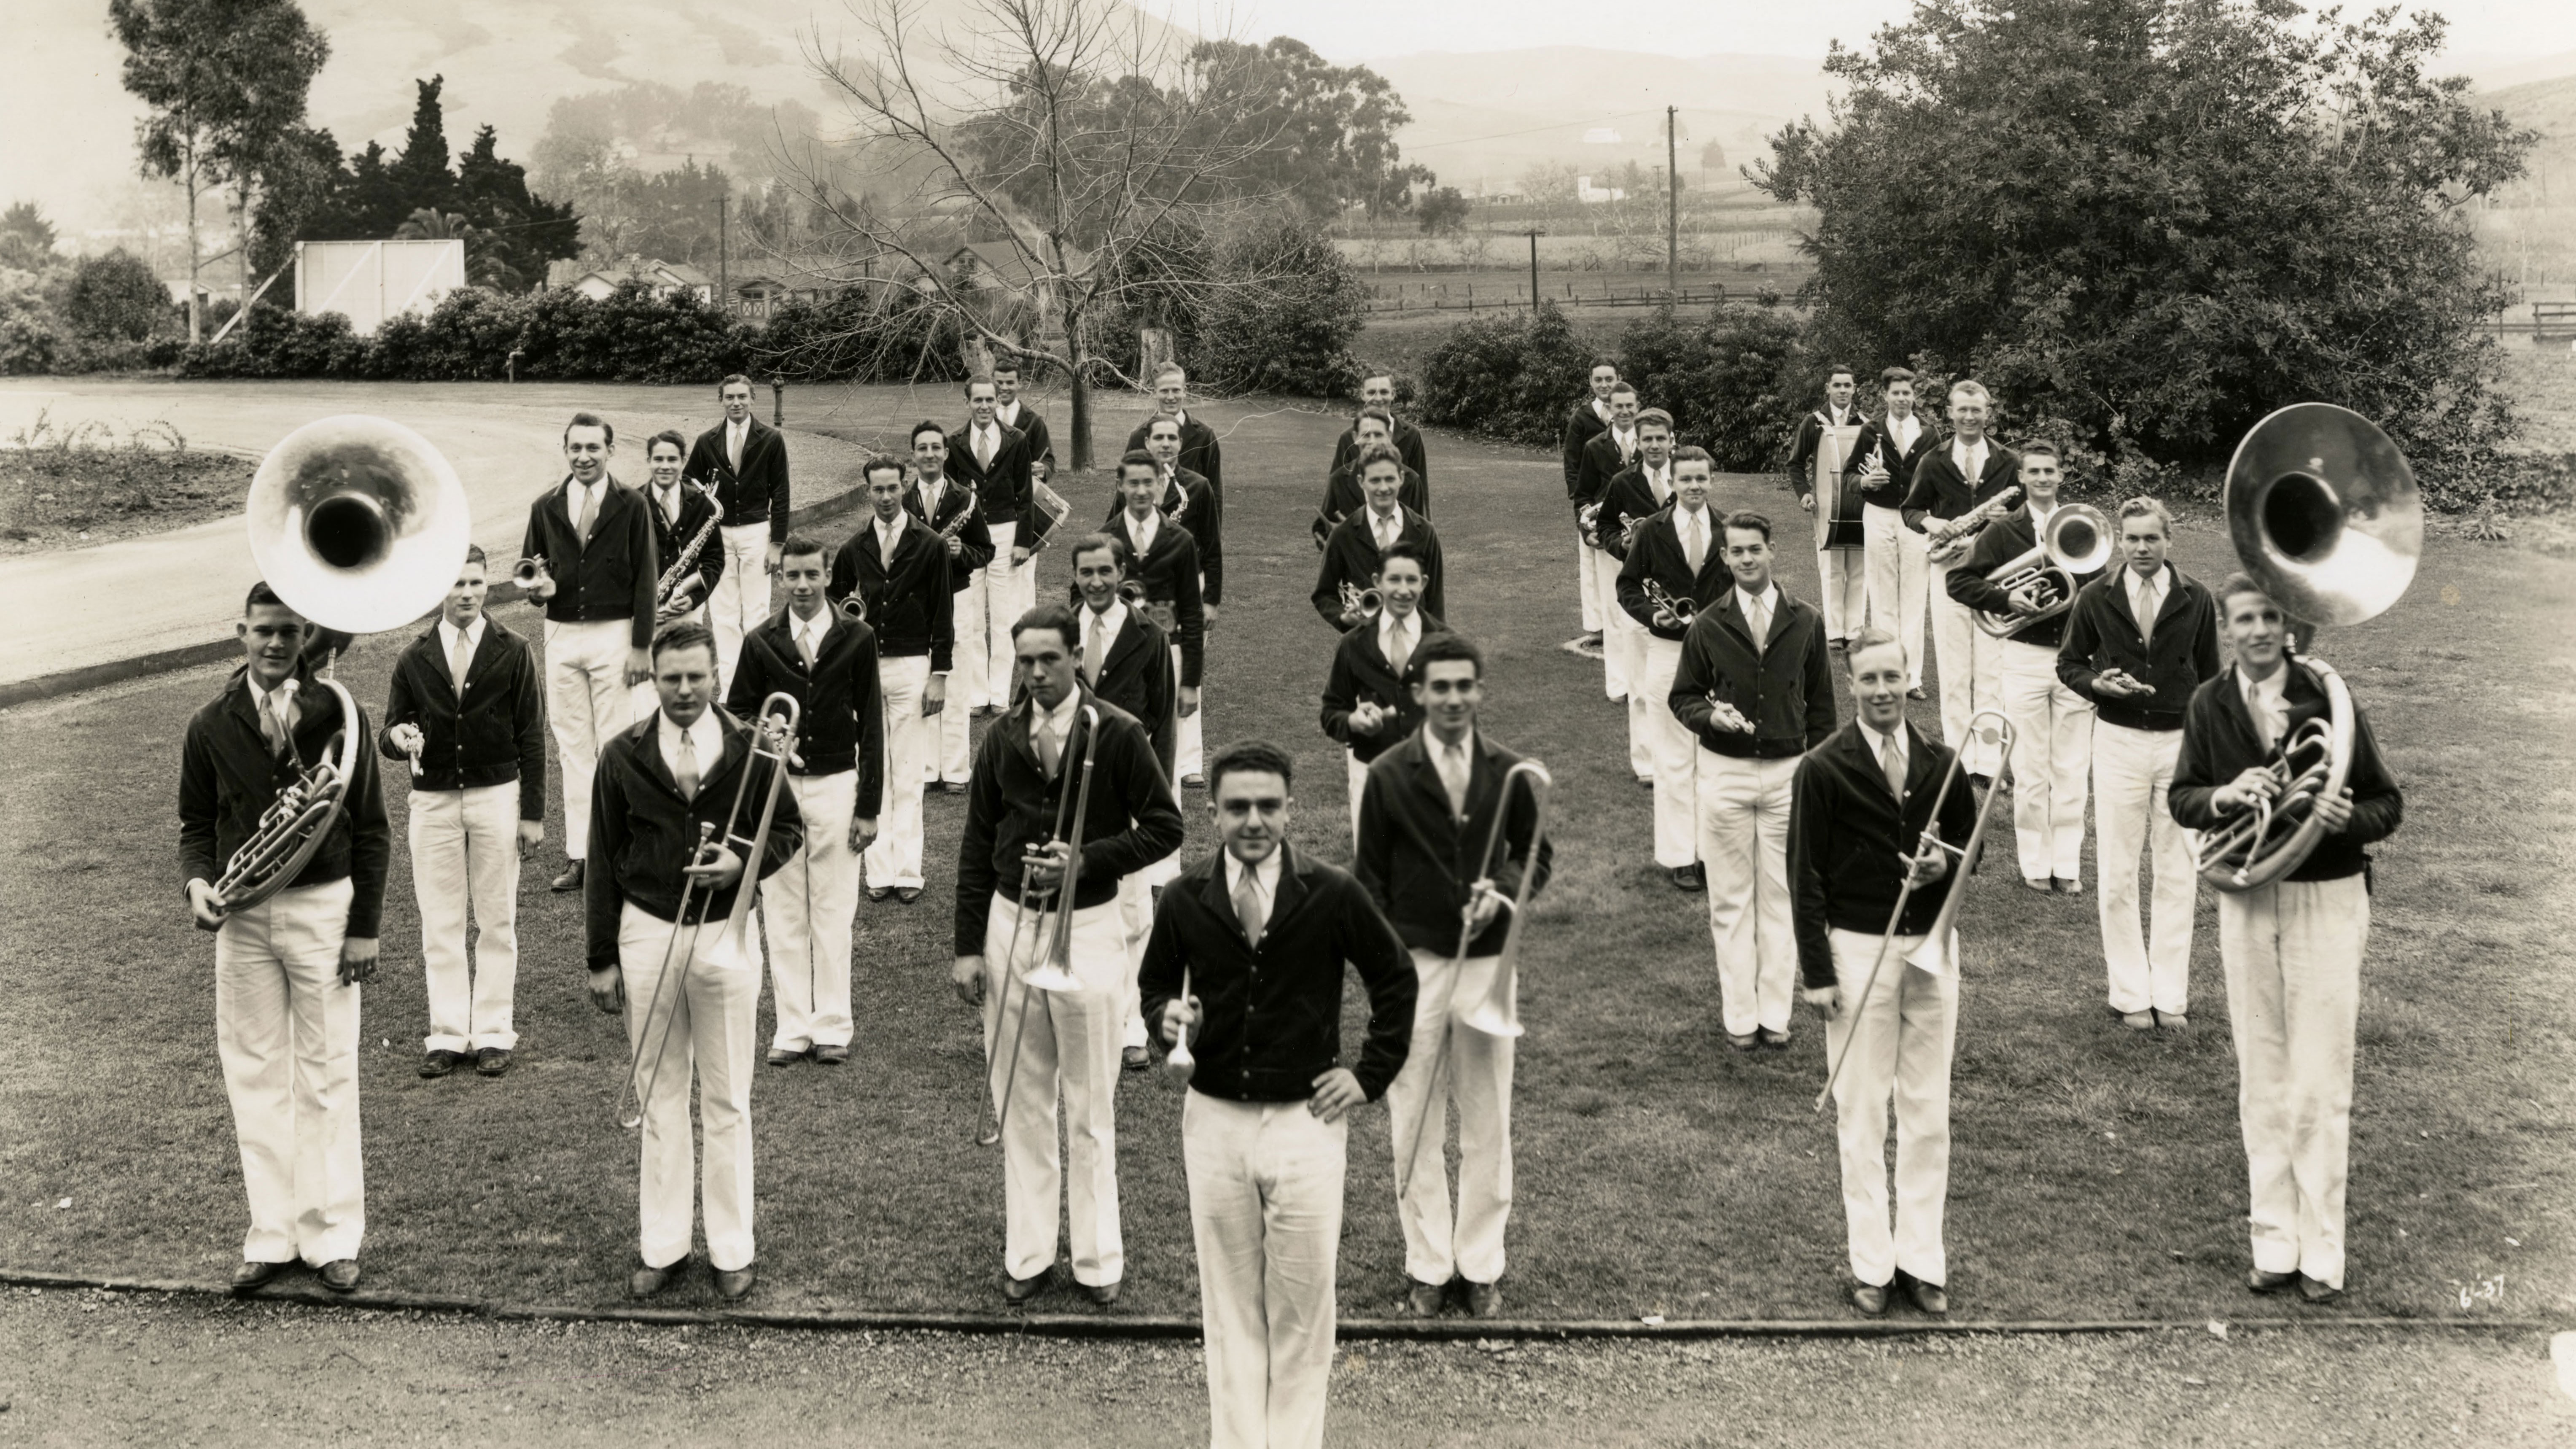 A black and white photo of the all-male marching band in 1937 in formation on the Cal Poly track.